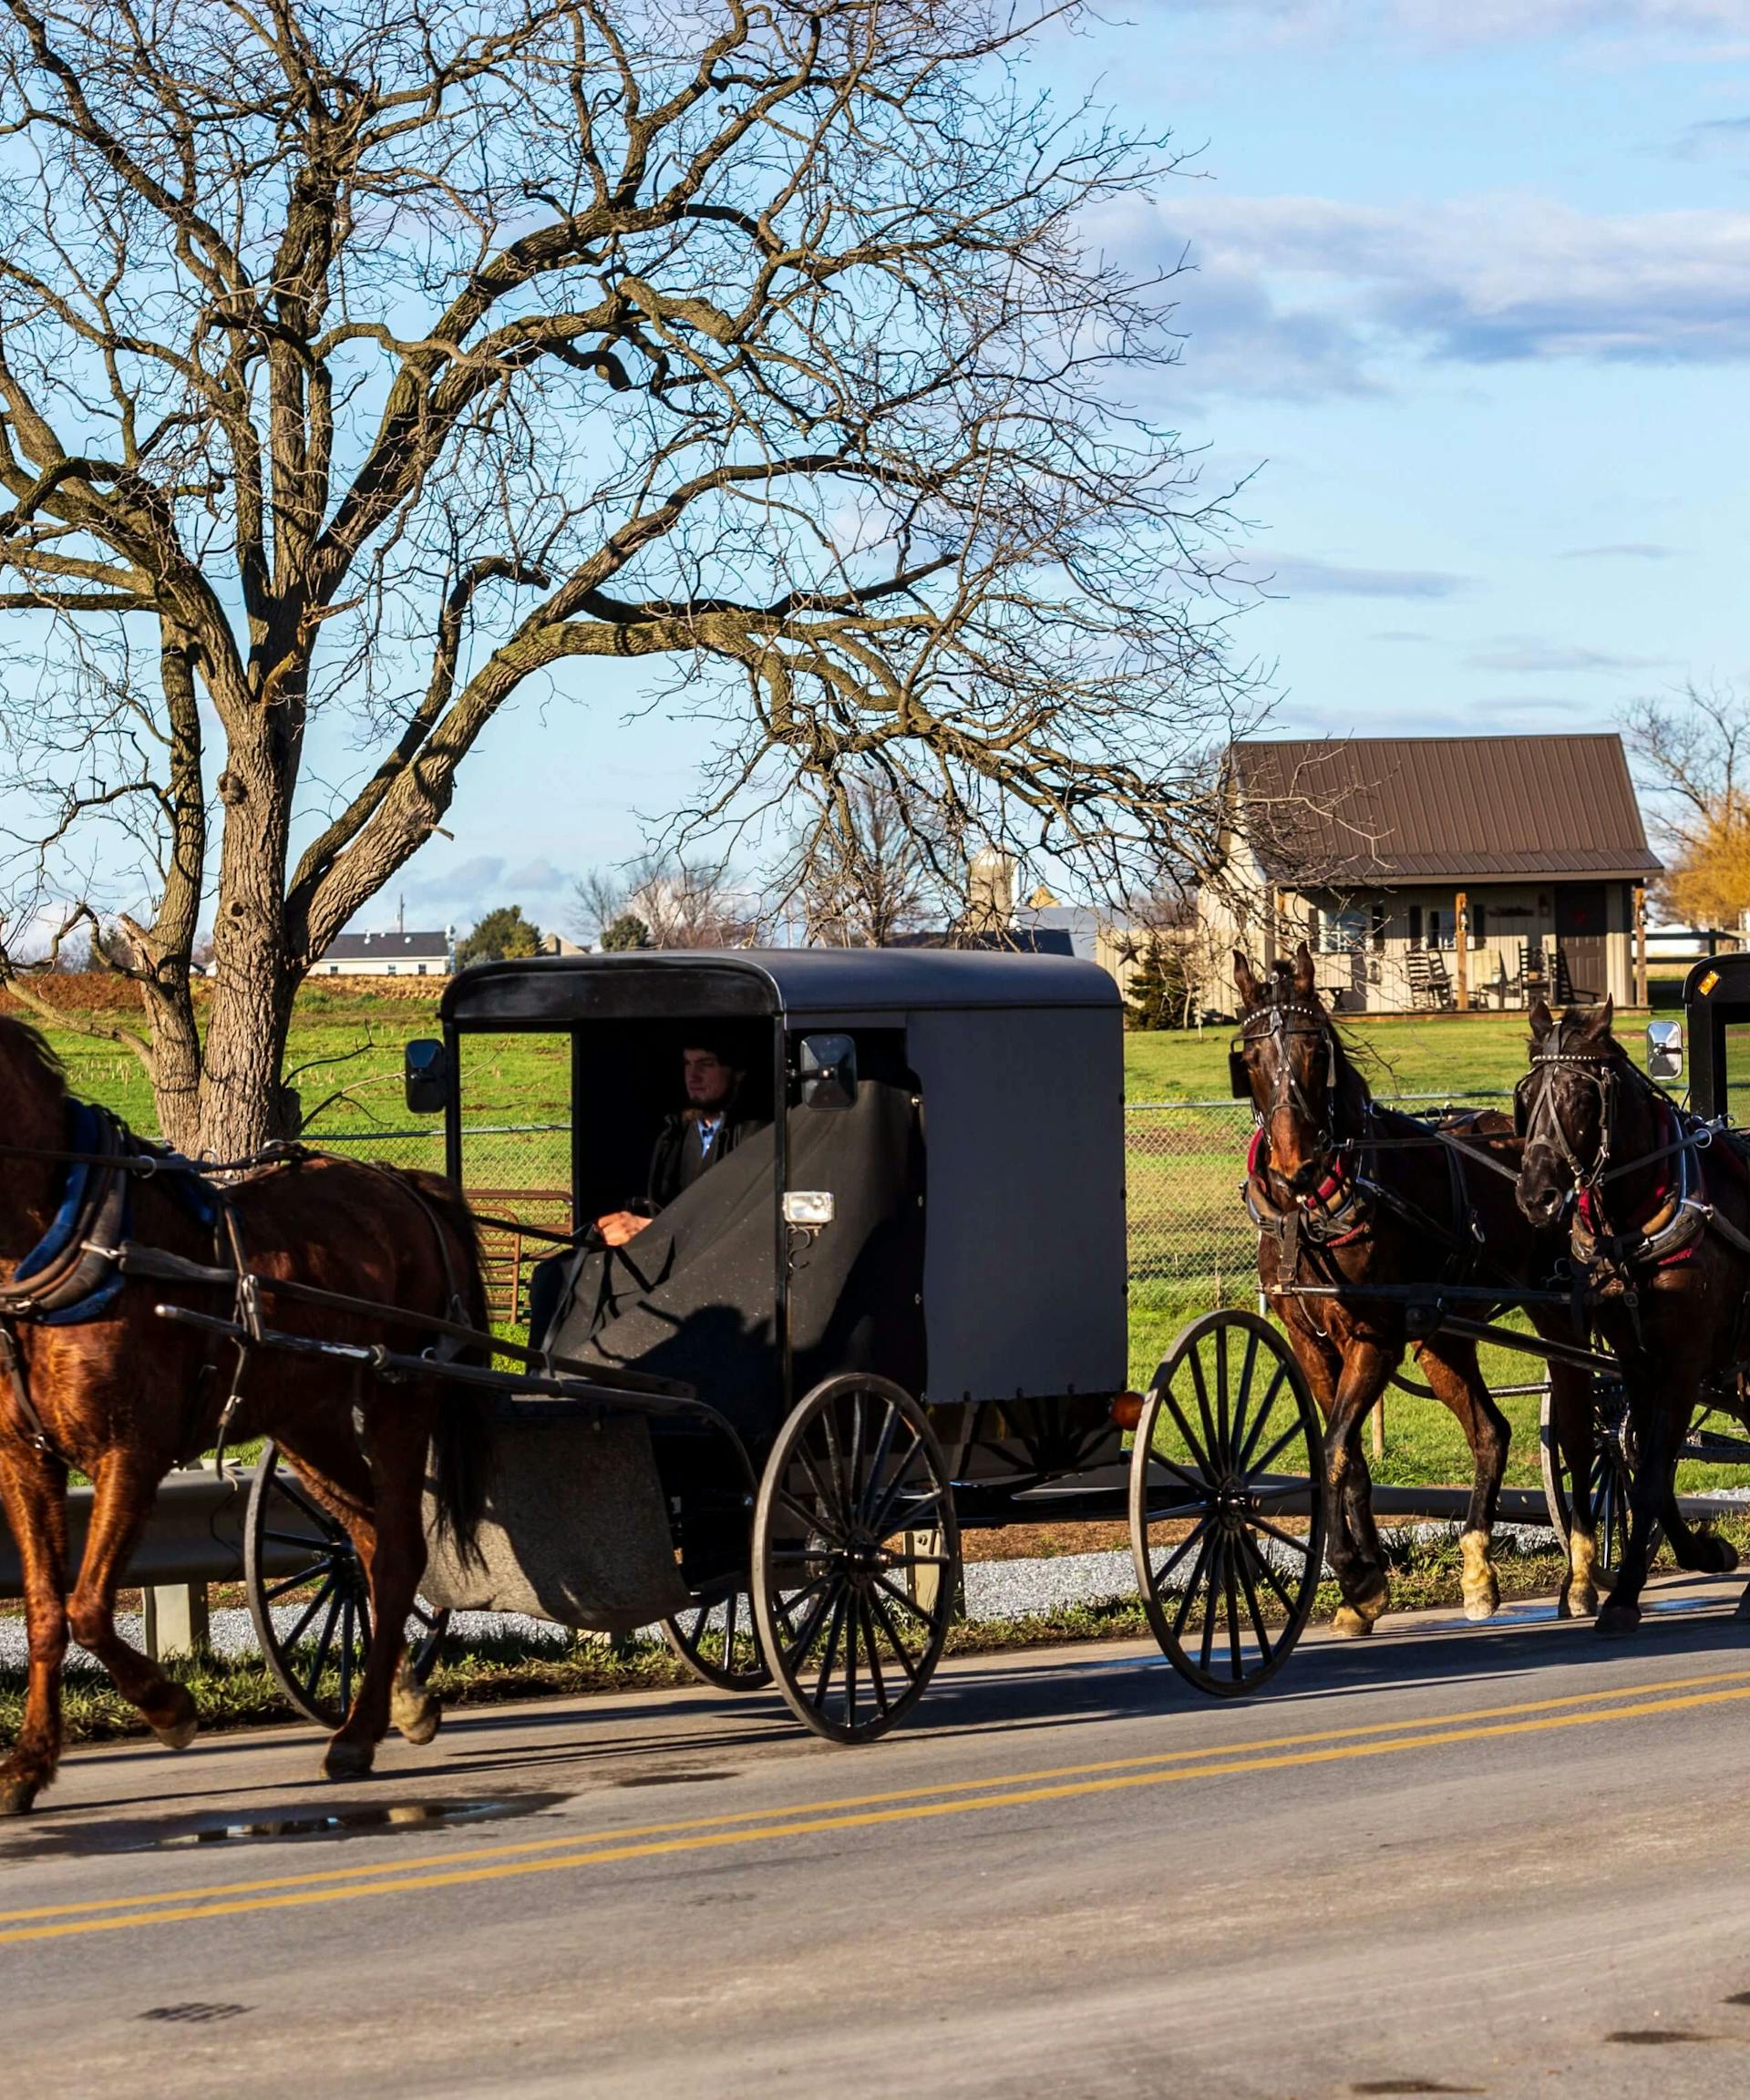 Pennsylvania Amish Community May Have Achieved First Herd Immunity In U.S.